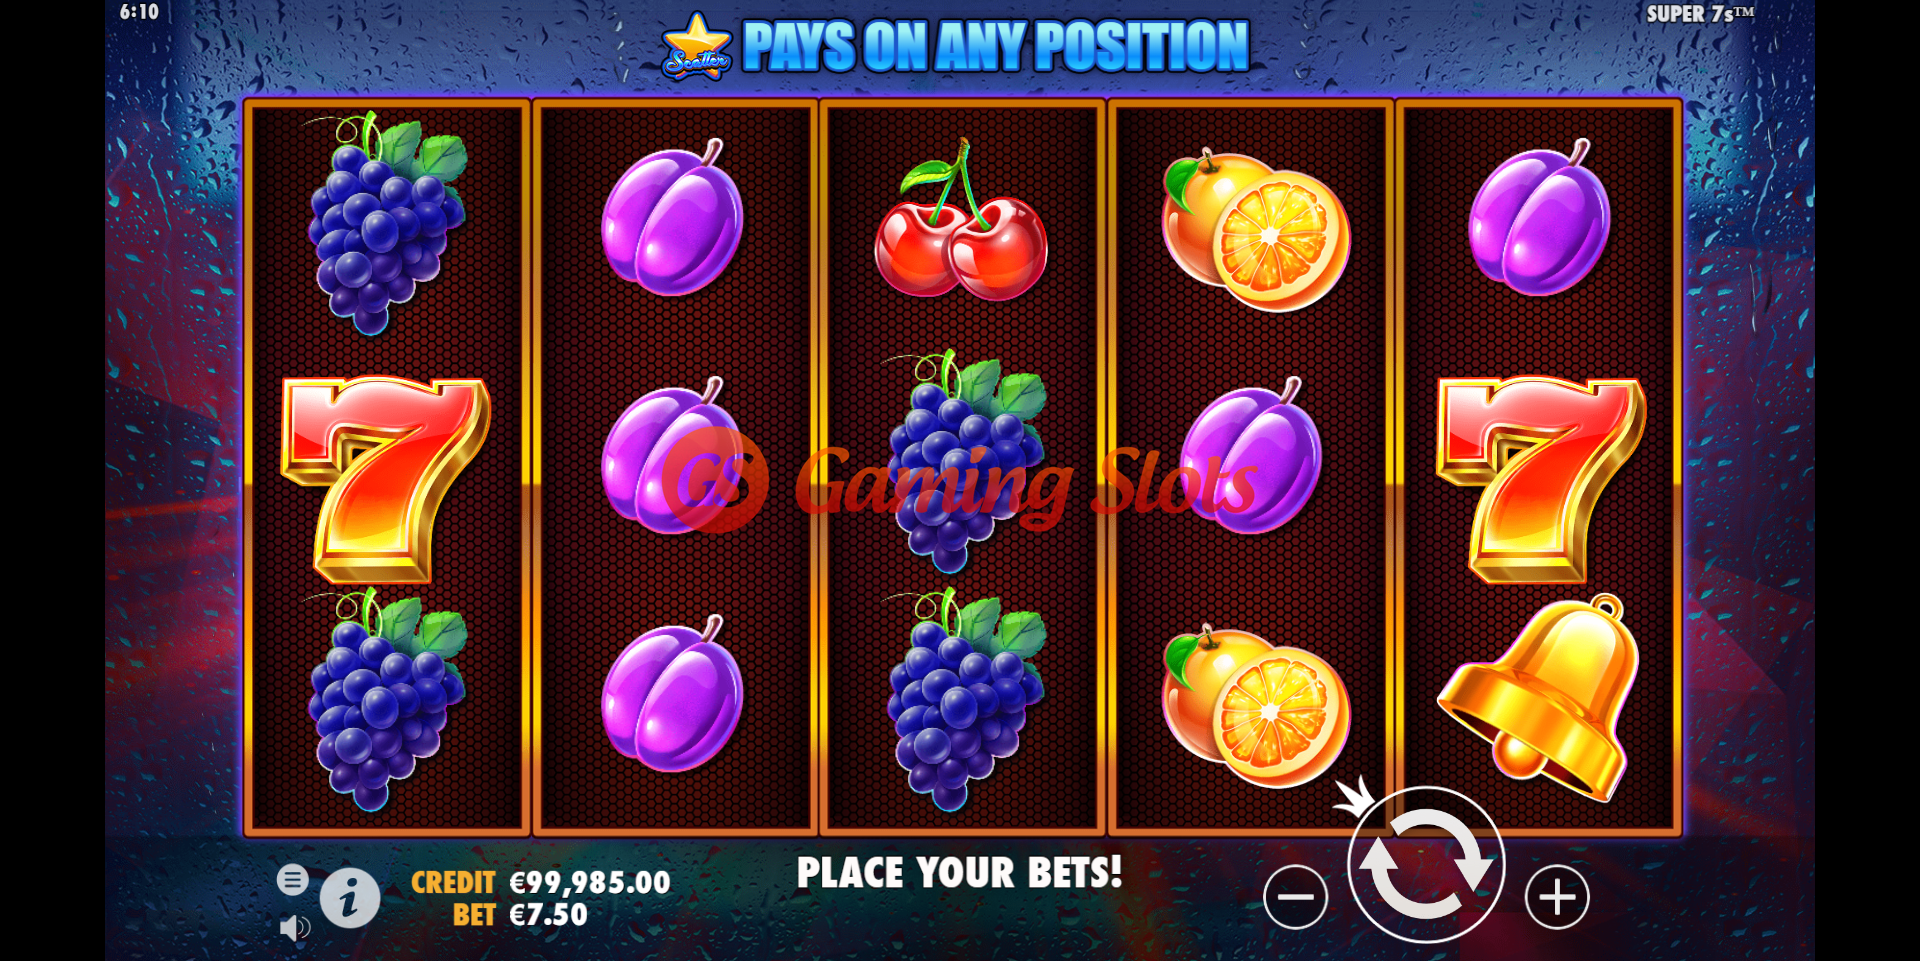 Base Game for Super 7s slot from Pragmatic Play